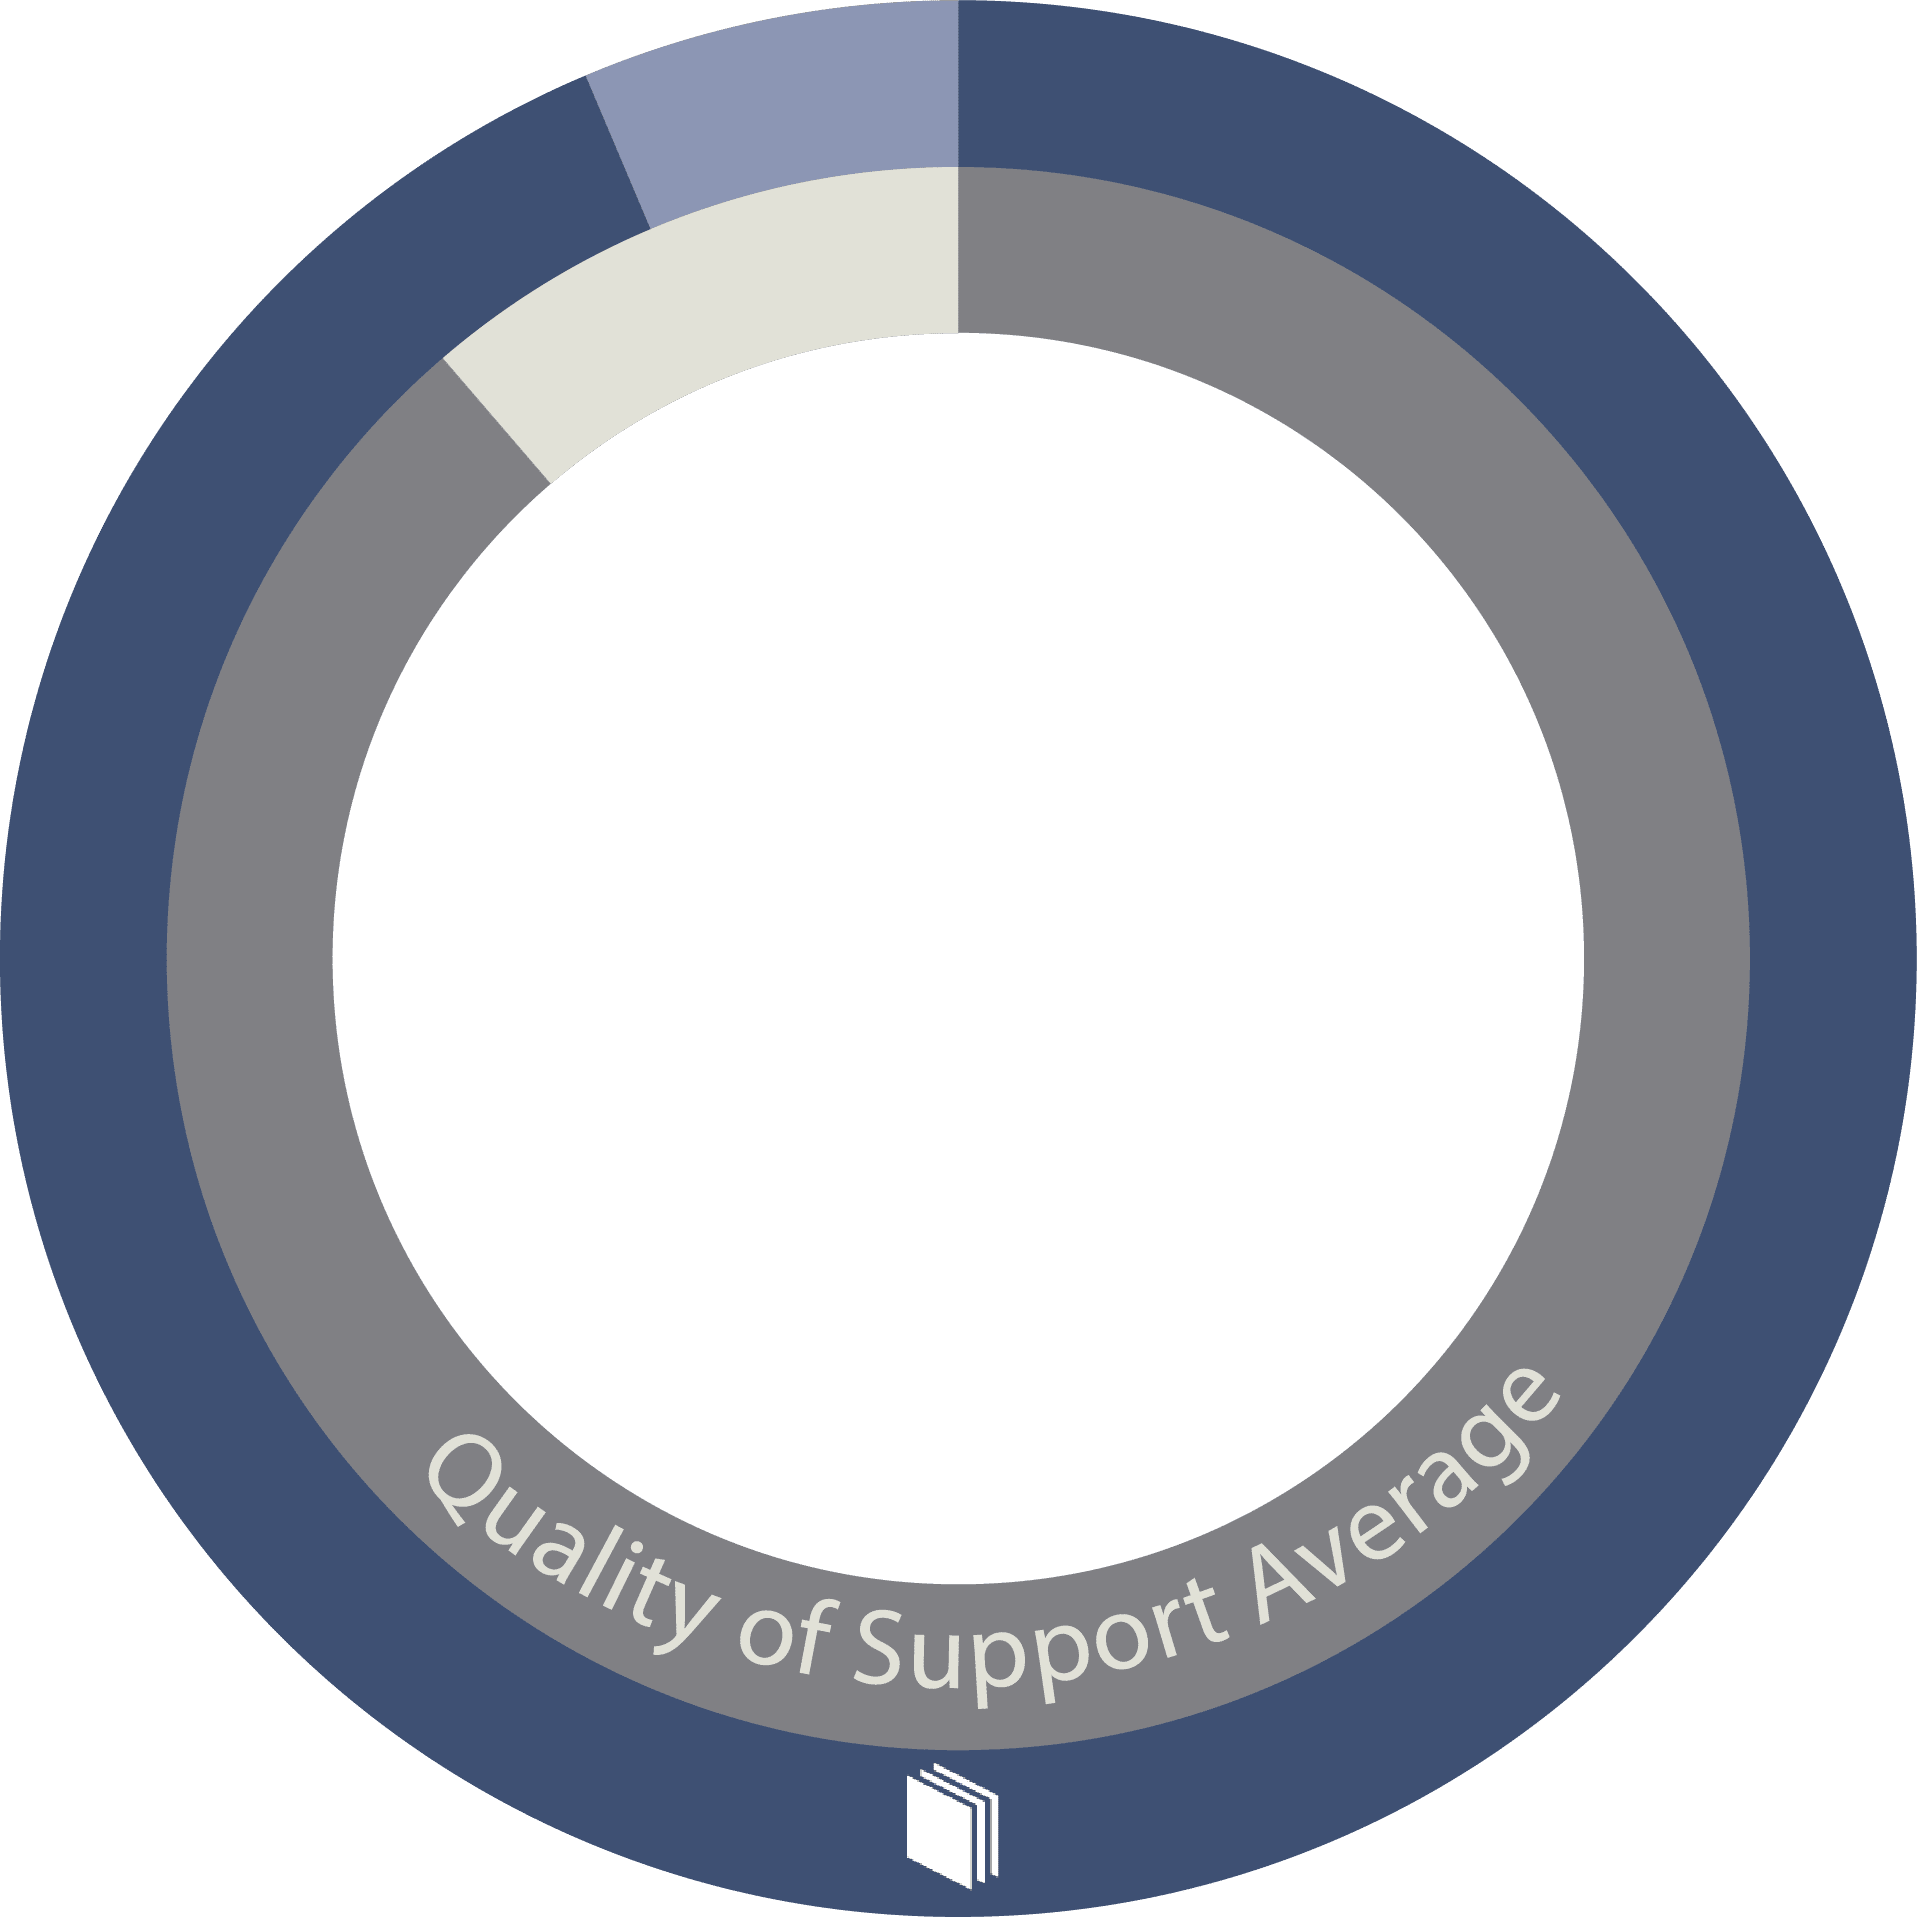 MyCase software is rated 8.8 out of 10 for quality of support, compared to an average of 8.4 out of 10 for other legal case management software.